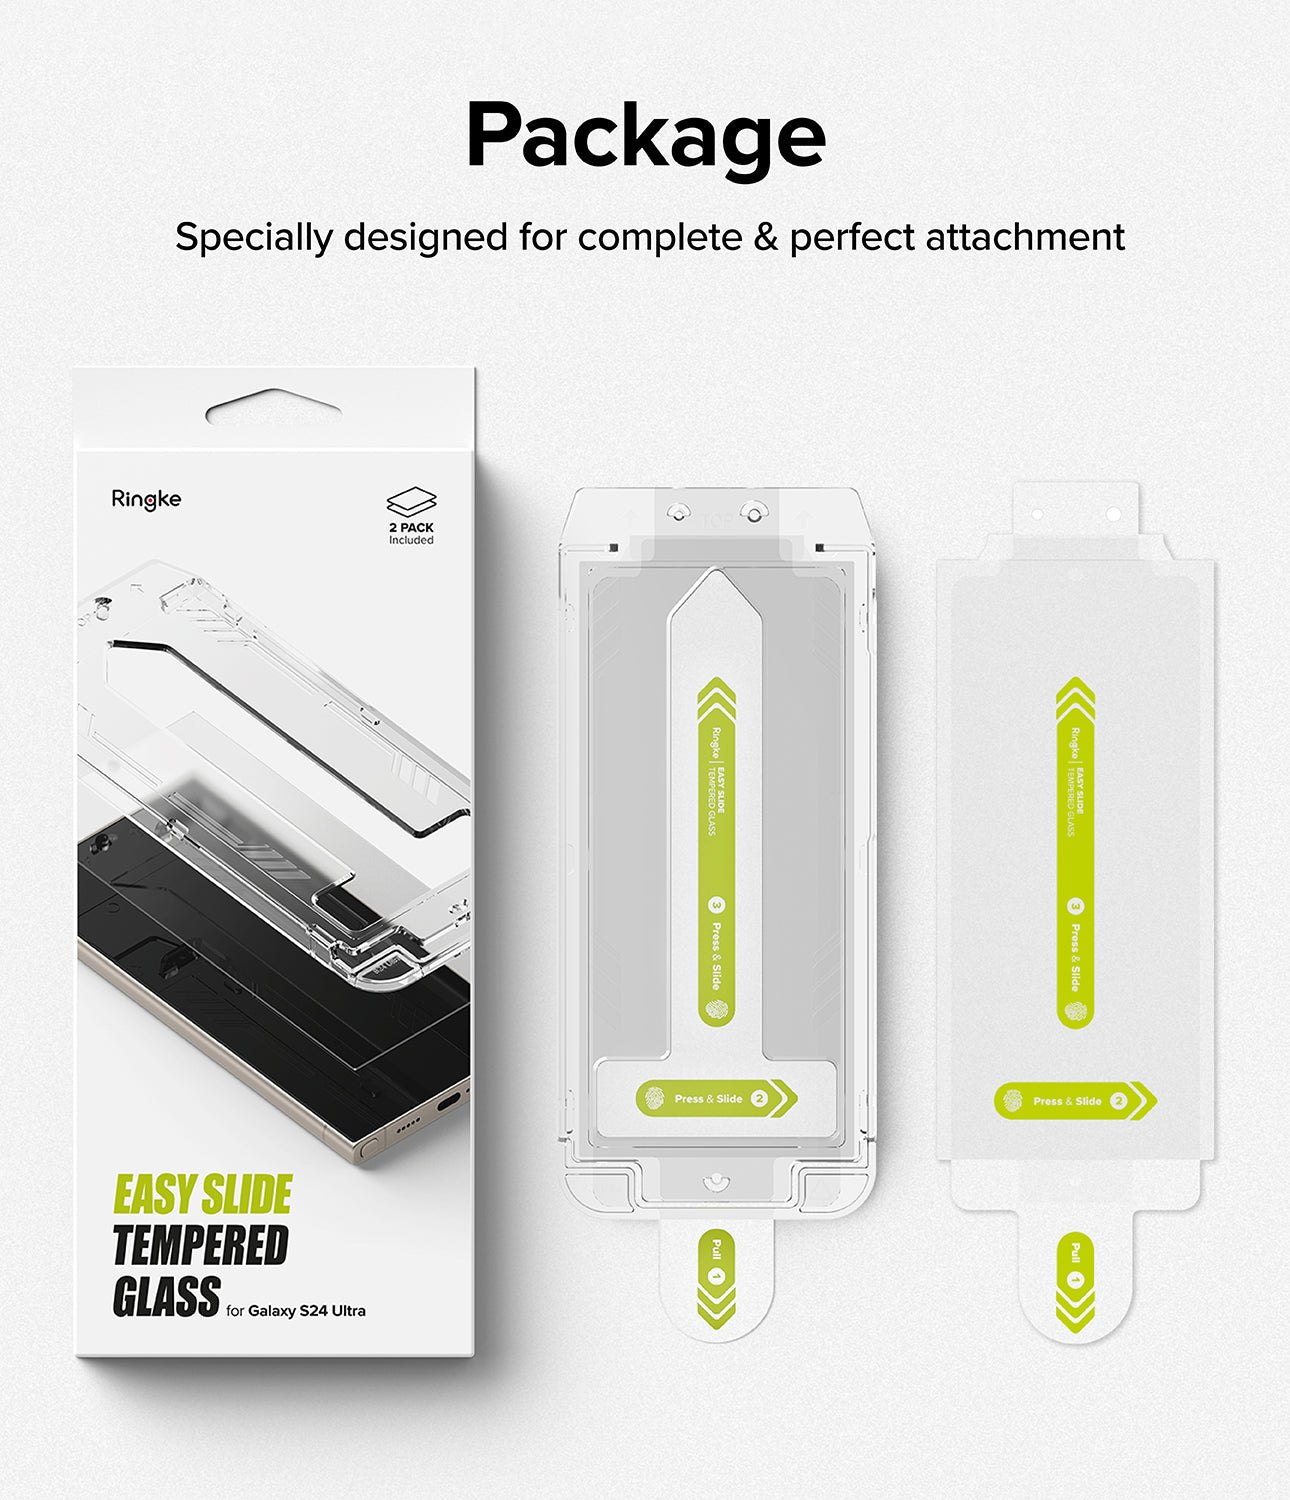 Galaxy S24 Ultra Screen Protector | Easy Slide Tempered Glass - Package. Specially designed for complete and perfect attachment.